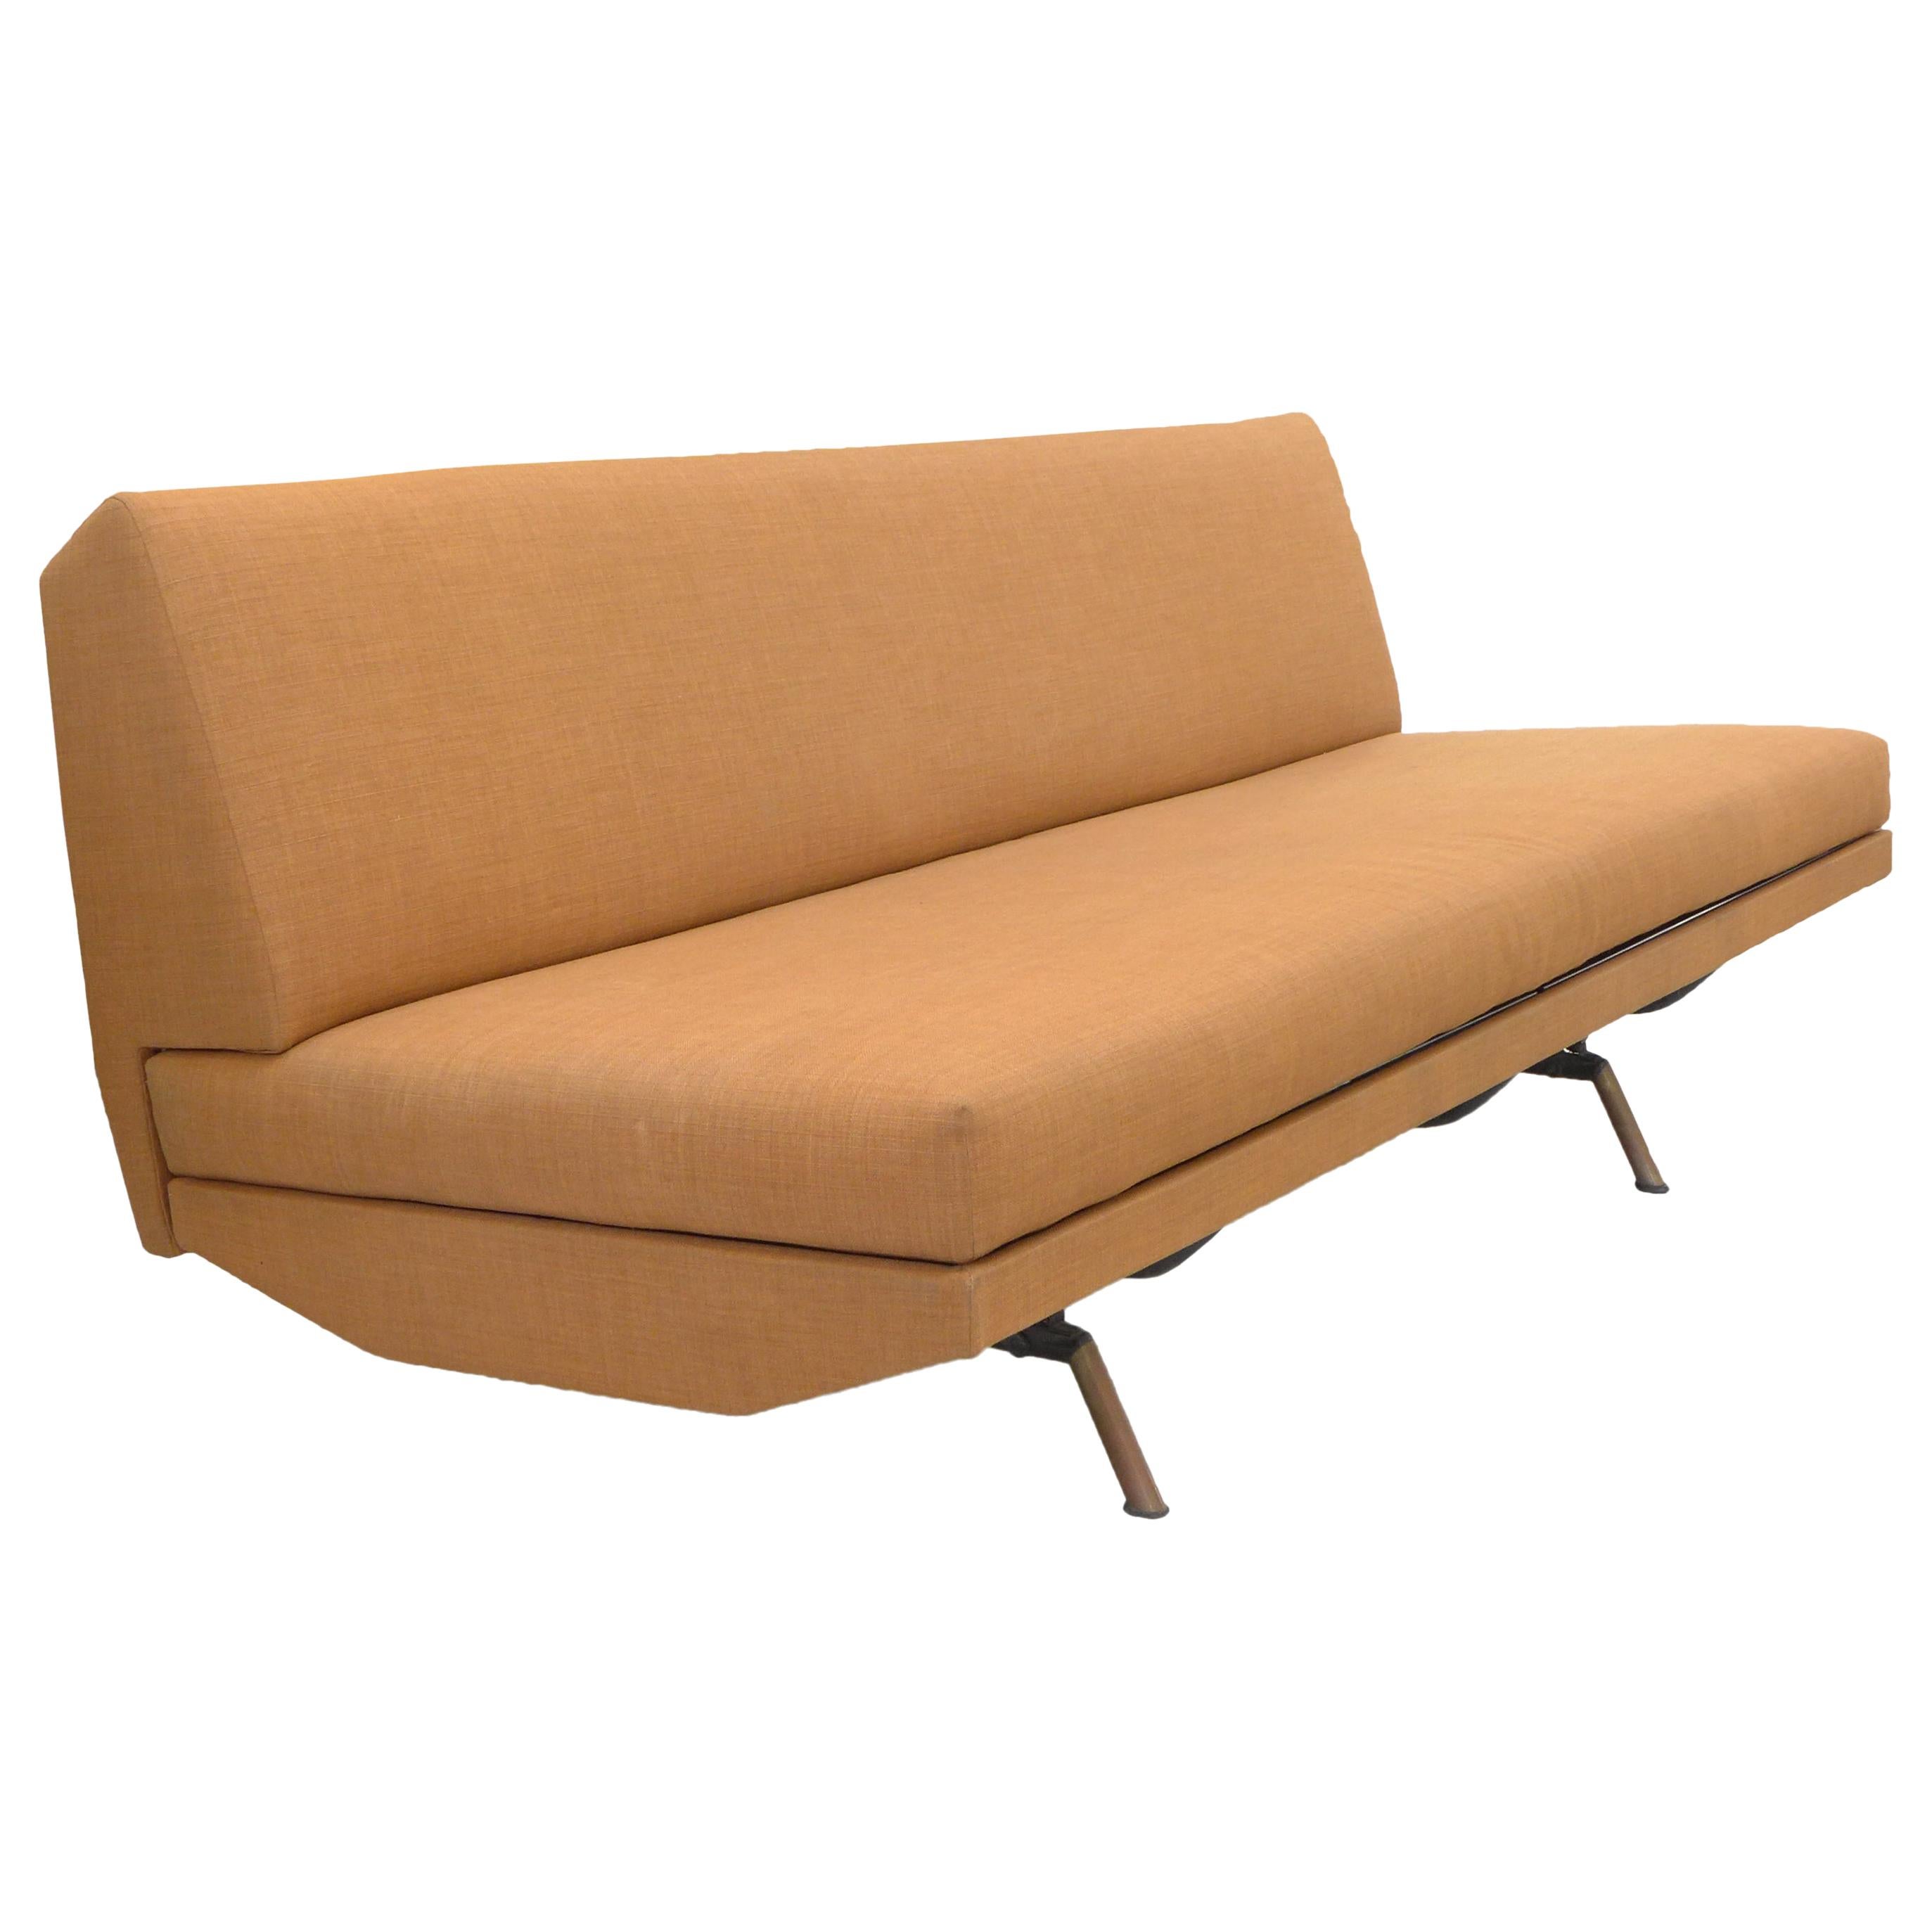 Mid-Century Modern Sofa, Daybed, Lounge by Marco Zanuso for Airflex For Sale